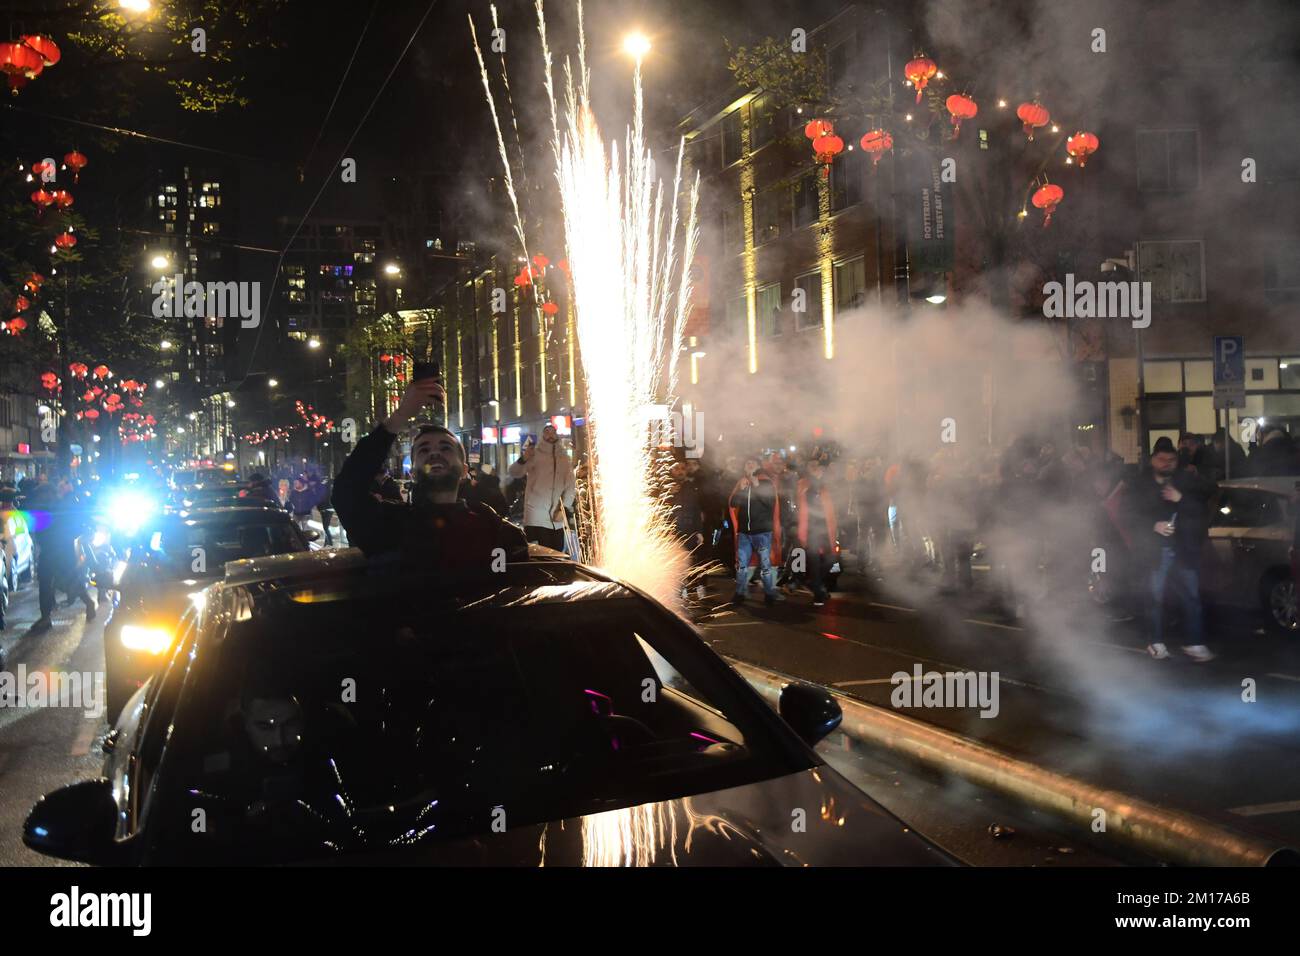 12-10-2022.Rotterdam,The Netherlands.Big celebration in the streets after Morocco beat Portugal 1-0 at the world cup.Roads were blocked with honking cars and there was a lot of heavy fireworks.The police cleared the area after a few hours. Stock Photo